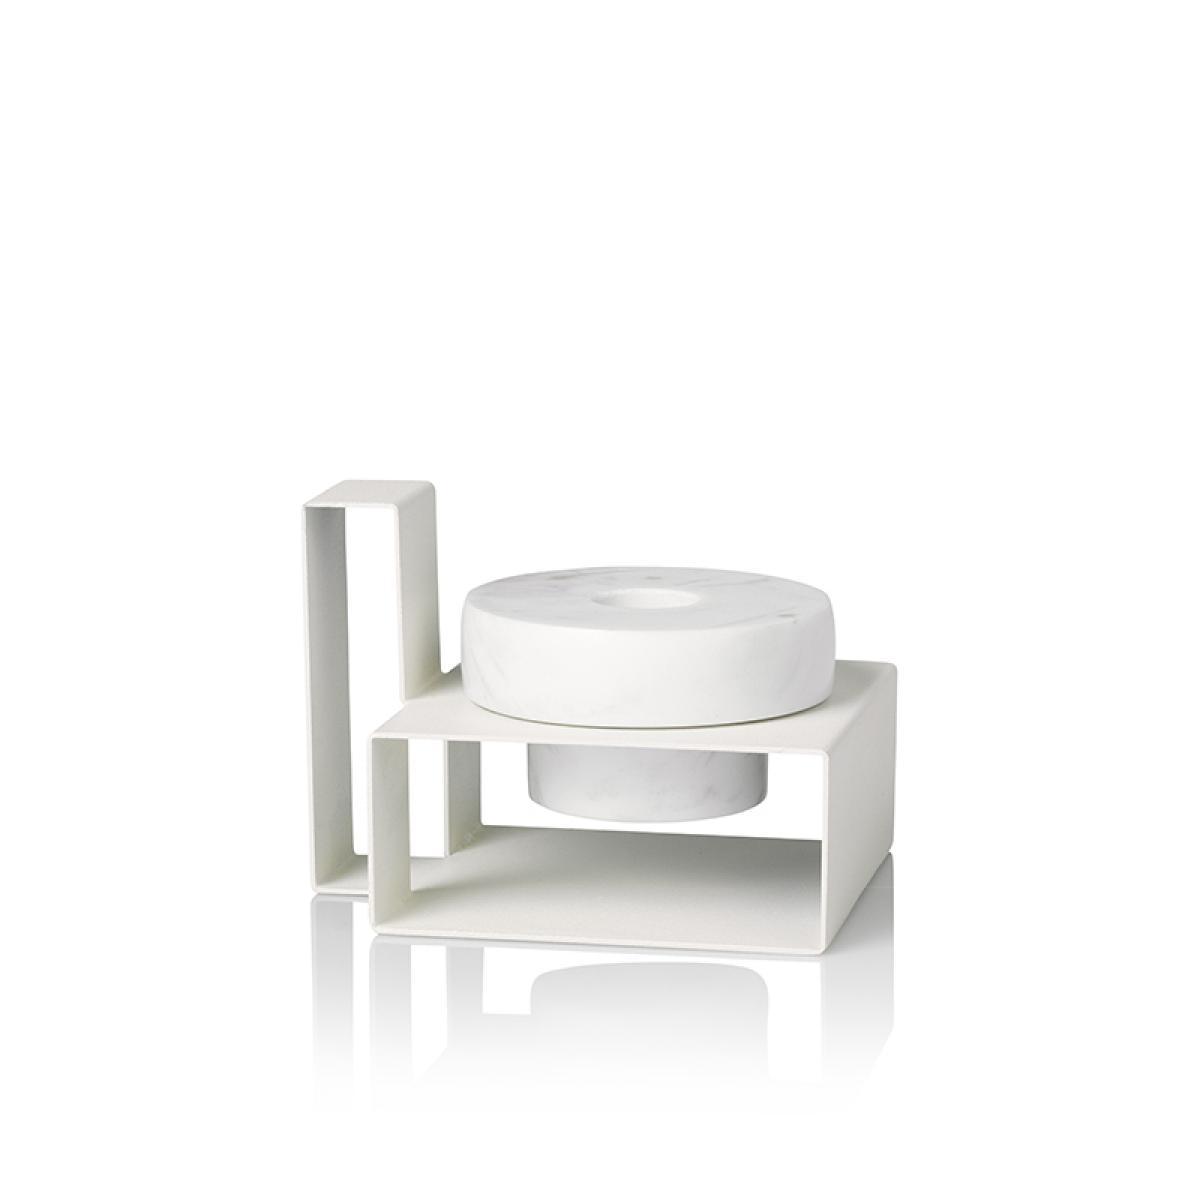 Lucie Kaas Marco Candlestick White, 8 cm